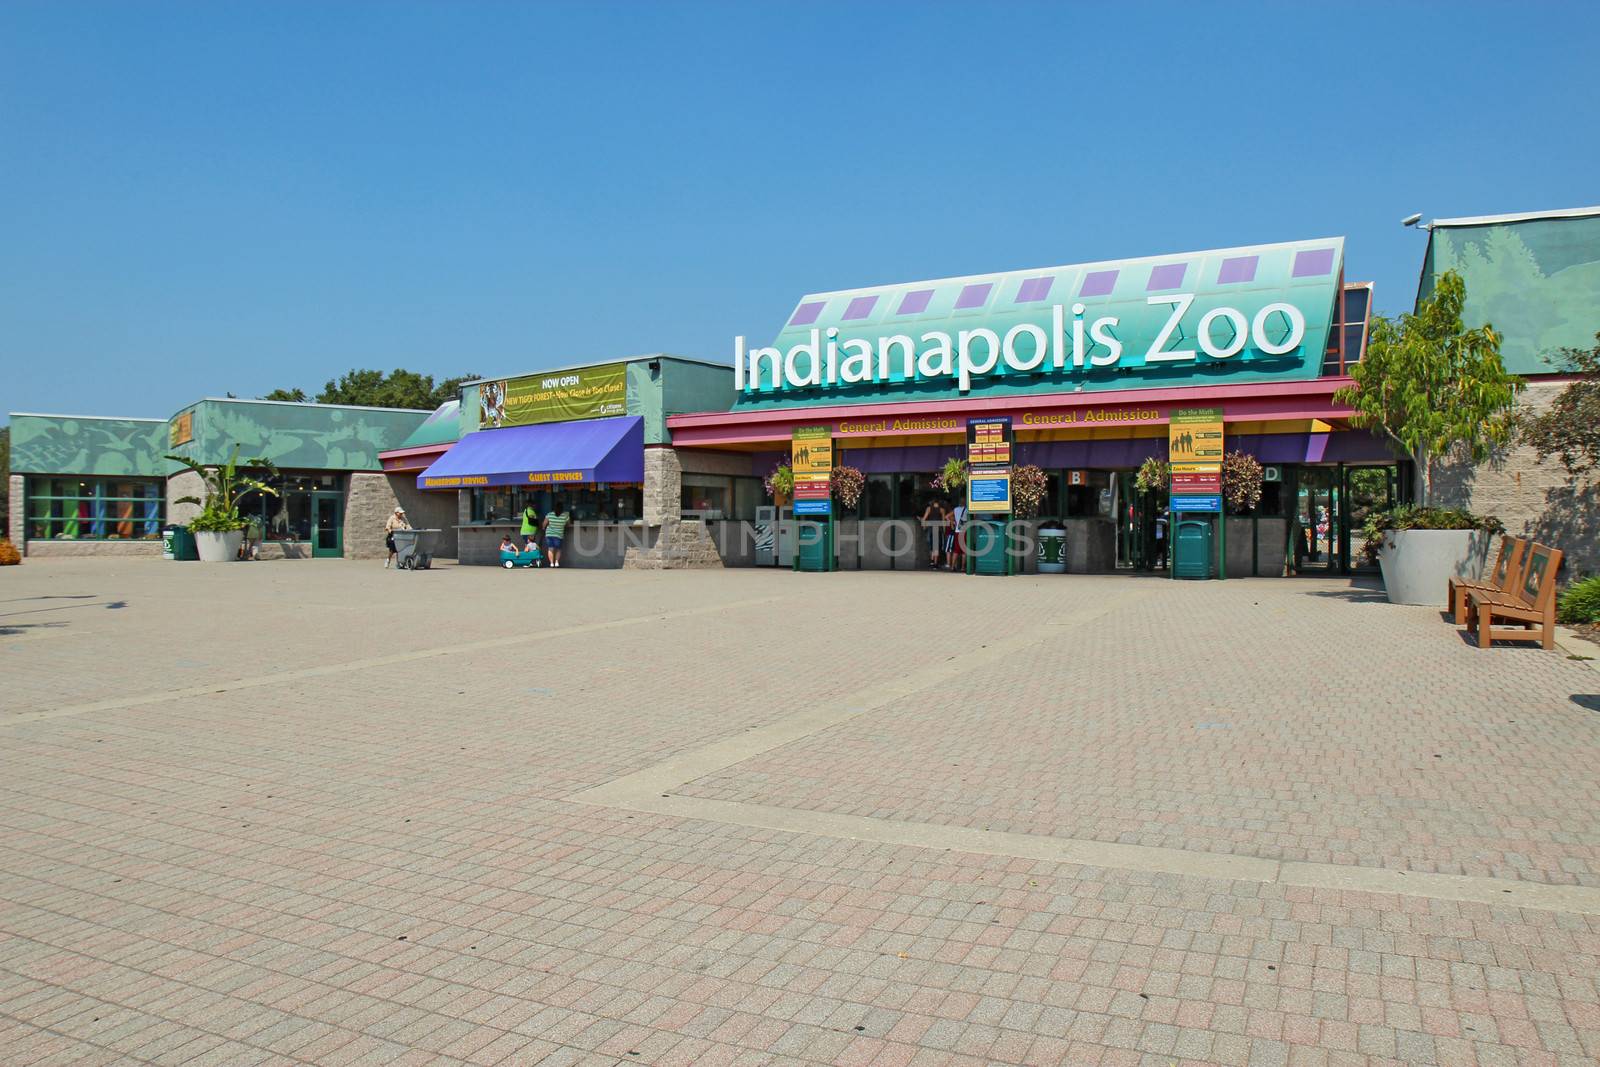 INDIANAPOLIS, INDIANA - SEPTEMBER 3: Entrance to the Indianapolis Zoo on September 3, 2011. This zoo plays an important role in species conservation and hosts more than a million visitors a year.